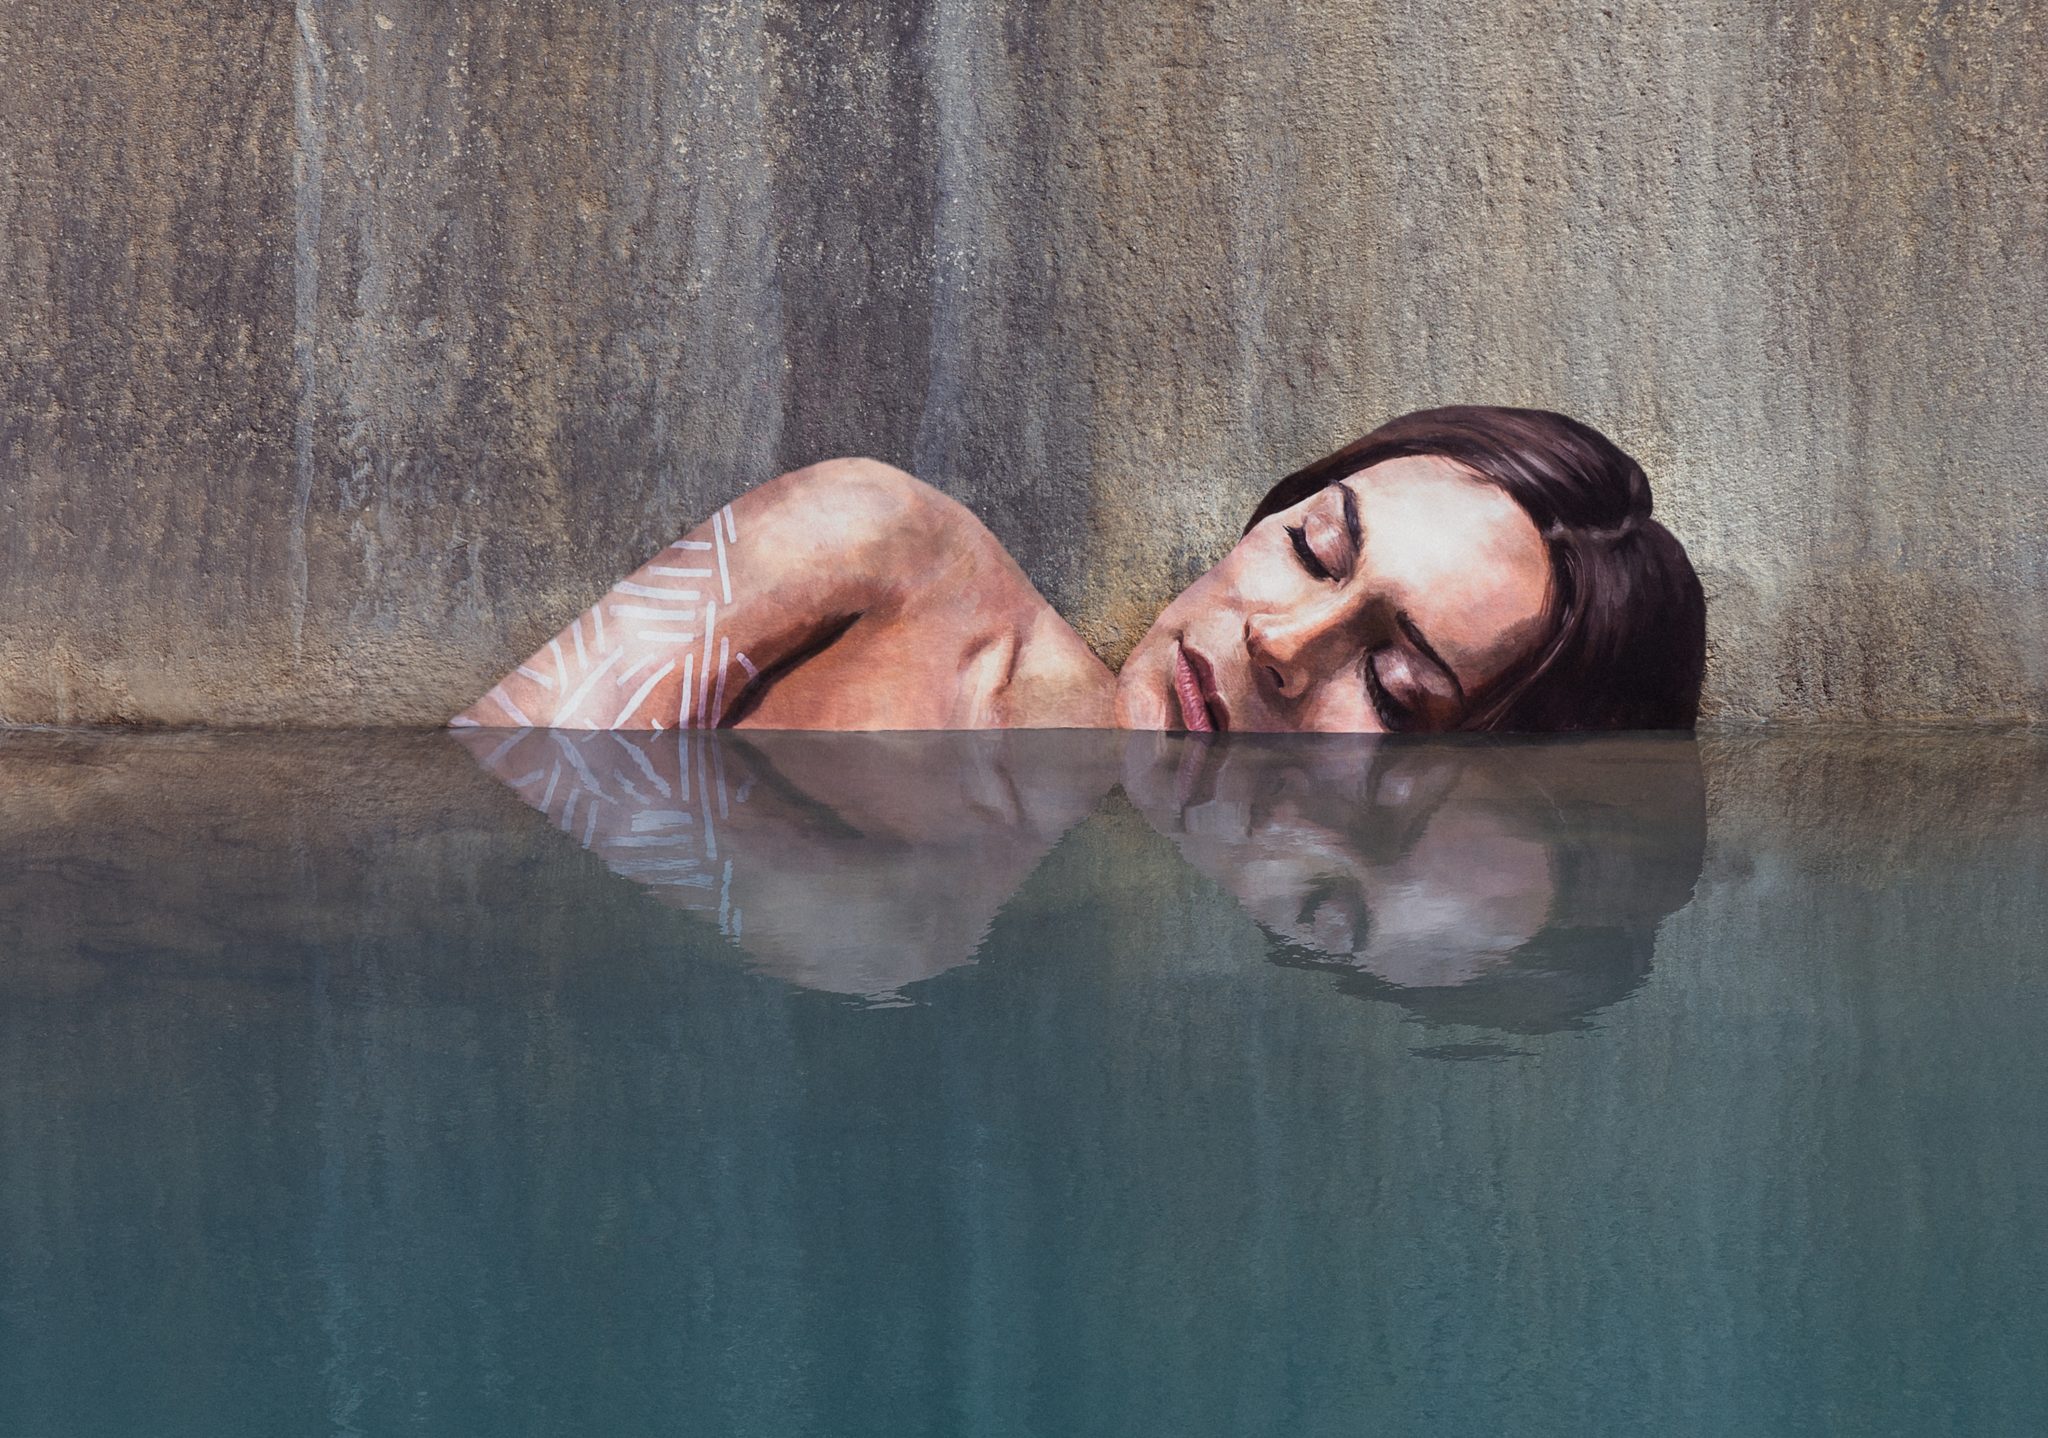 On Climate Change: Visionary Artist Sean Yoro's Rapidly Melting Iceburg Paintings